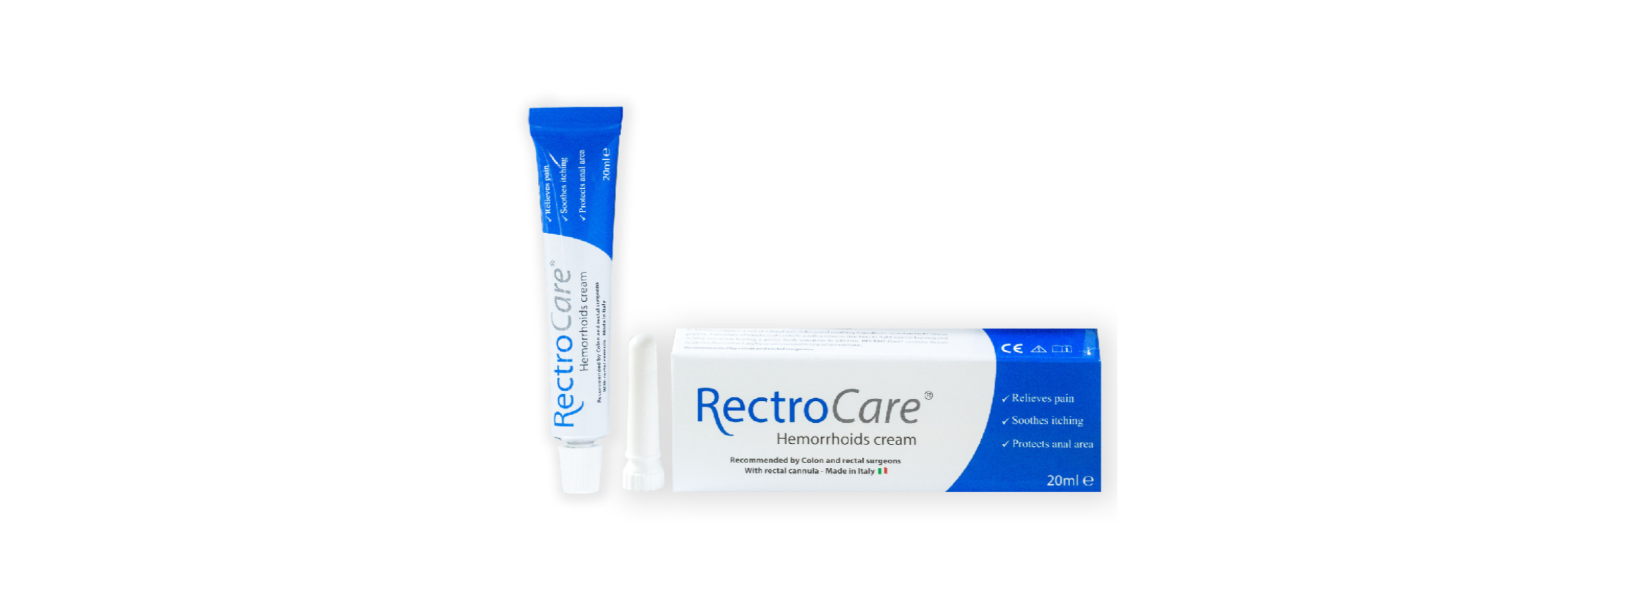 RECTROCare